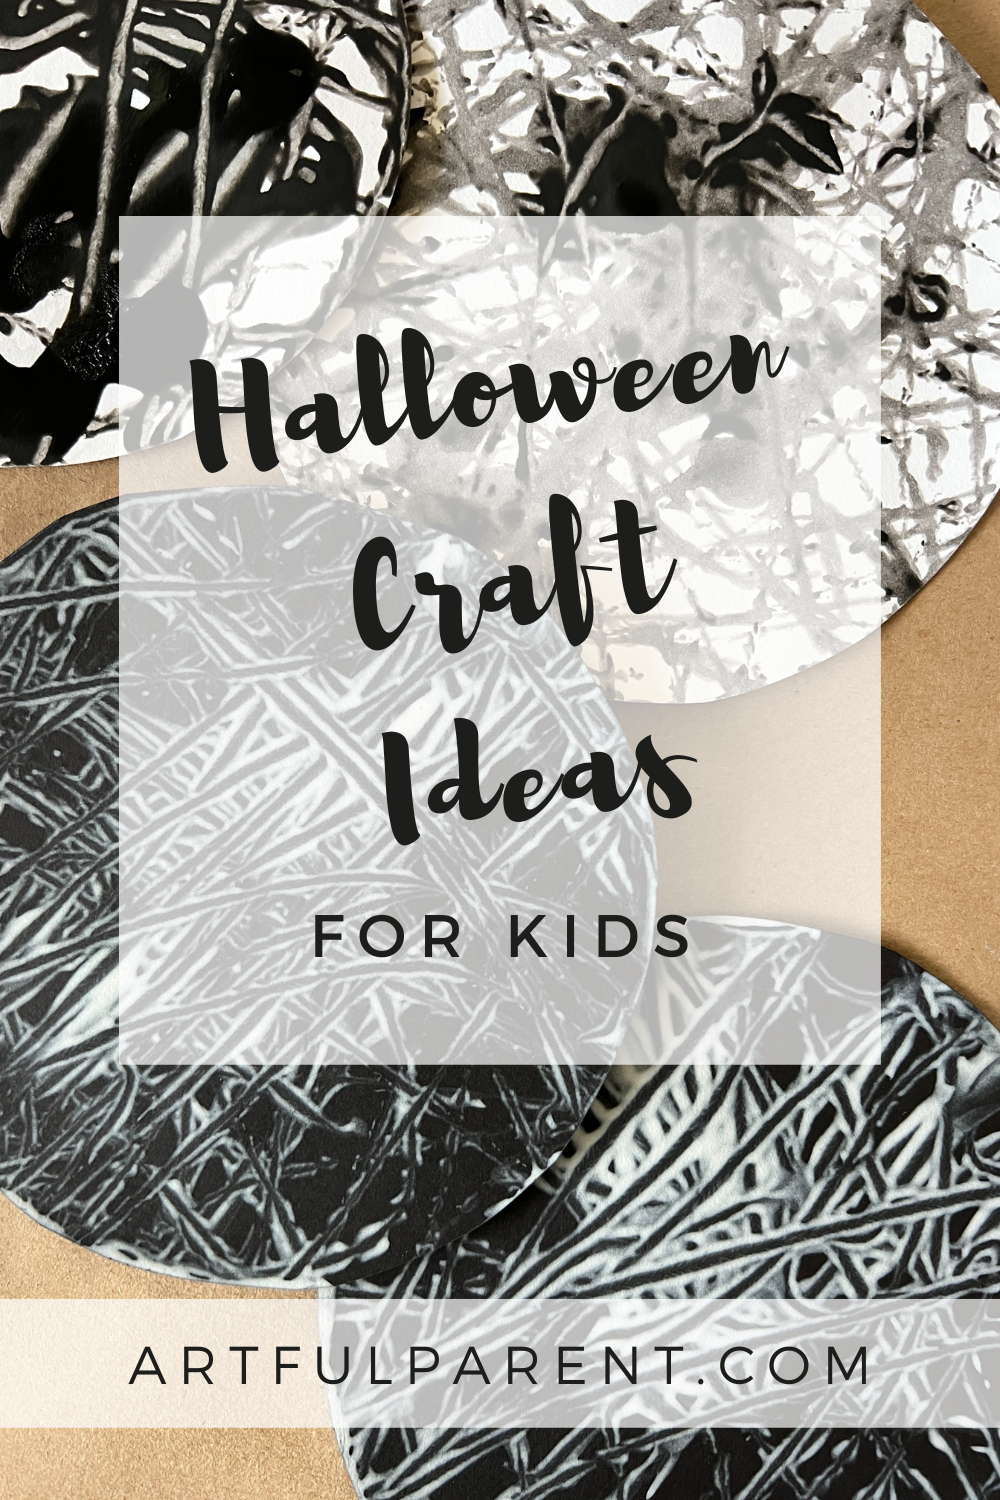 13 Awesome Halloween Craft Ideas for Kids